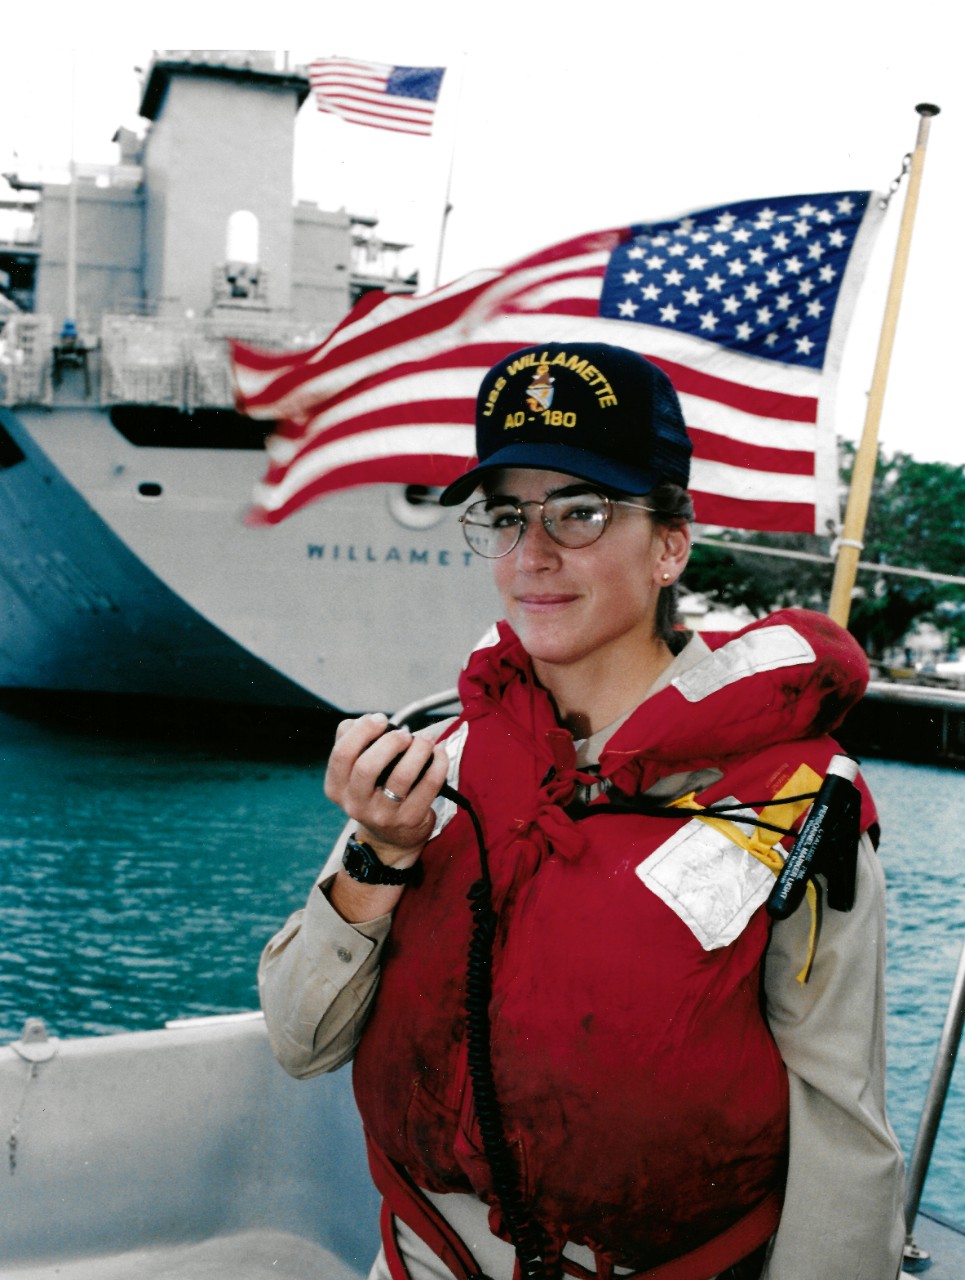 NMUSN-17:   Ensign Julia Lopez, Deck Division Officer, 1994.  Lopez makes preparations to get the Cimarron-class oiler USS Williamette (AO-180) underway from Pearl Harbor, Hawaii.   Photographed by PH2 Stephen Grzezdzinski, December 6, 1994.   Official U.S. Navy Photograph.   National Museum of the U.S. Navy Photograph Collection. 